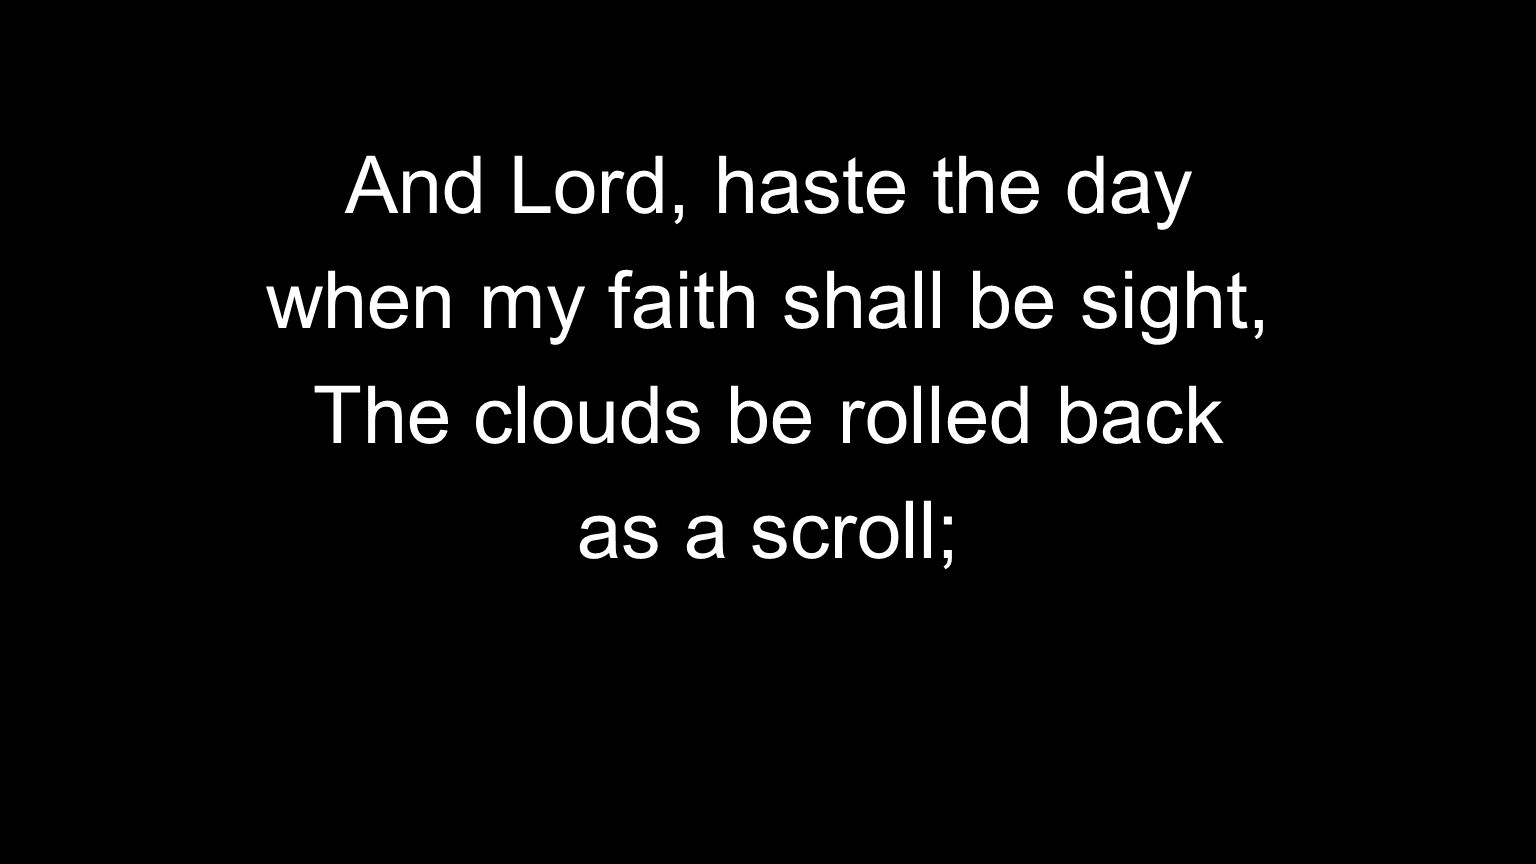 And Lord, haste the day when my faith shall be sight, The clouds be rolled back as a scroll;